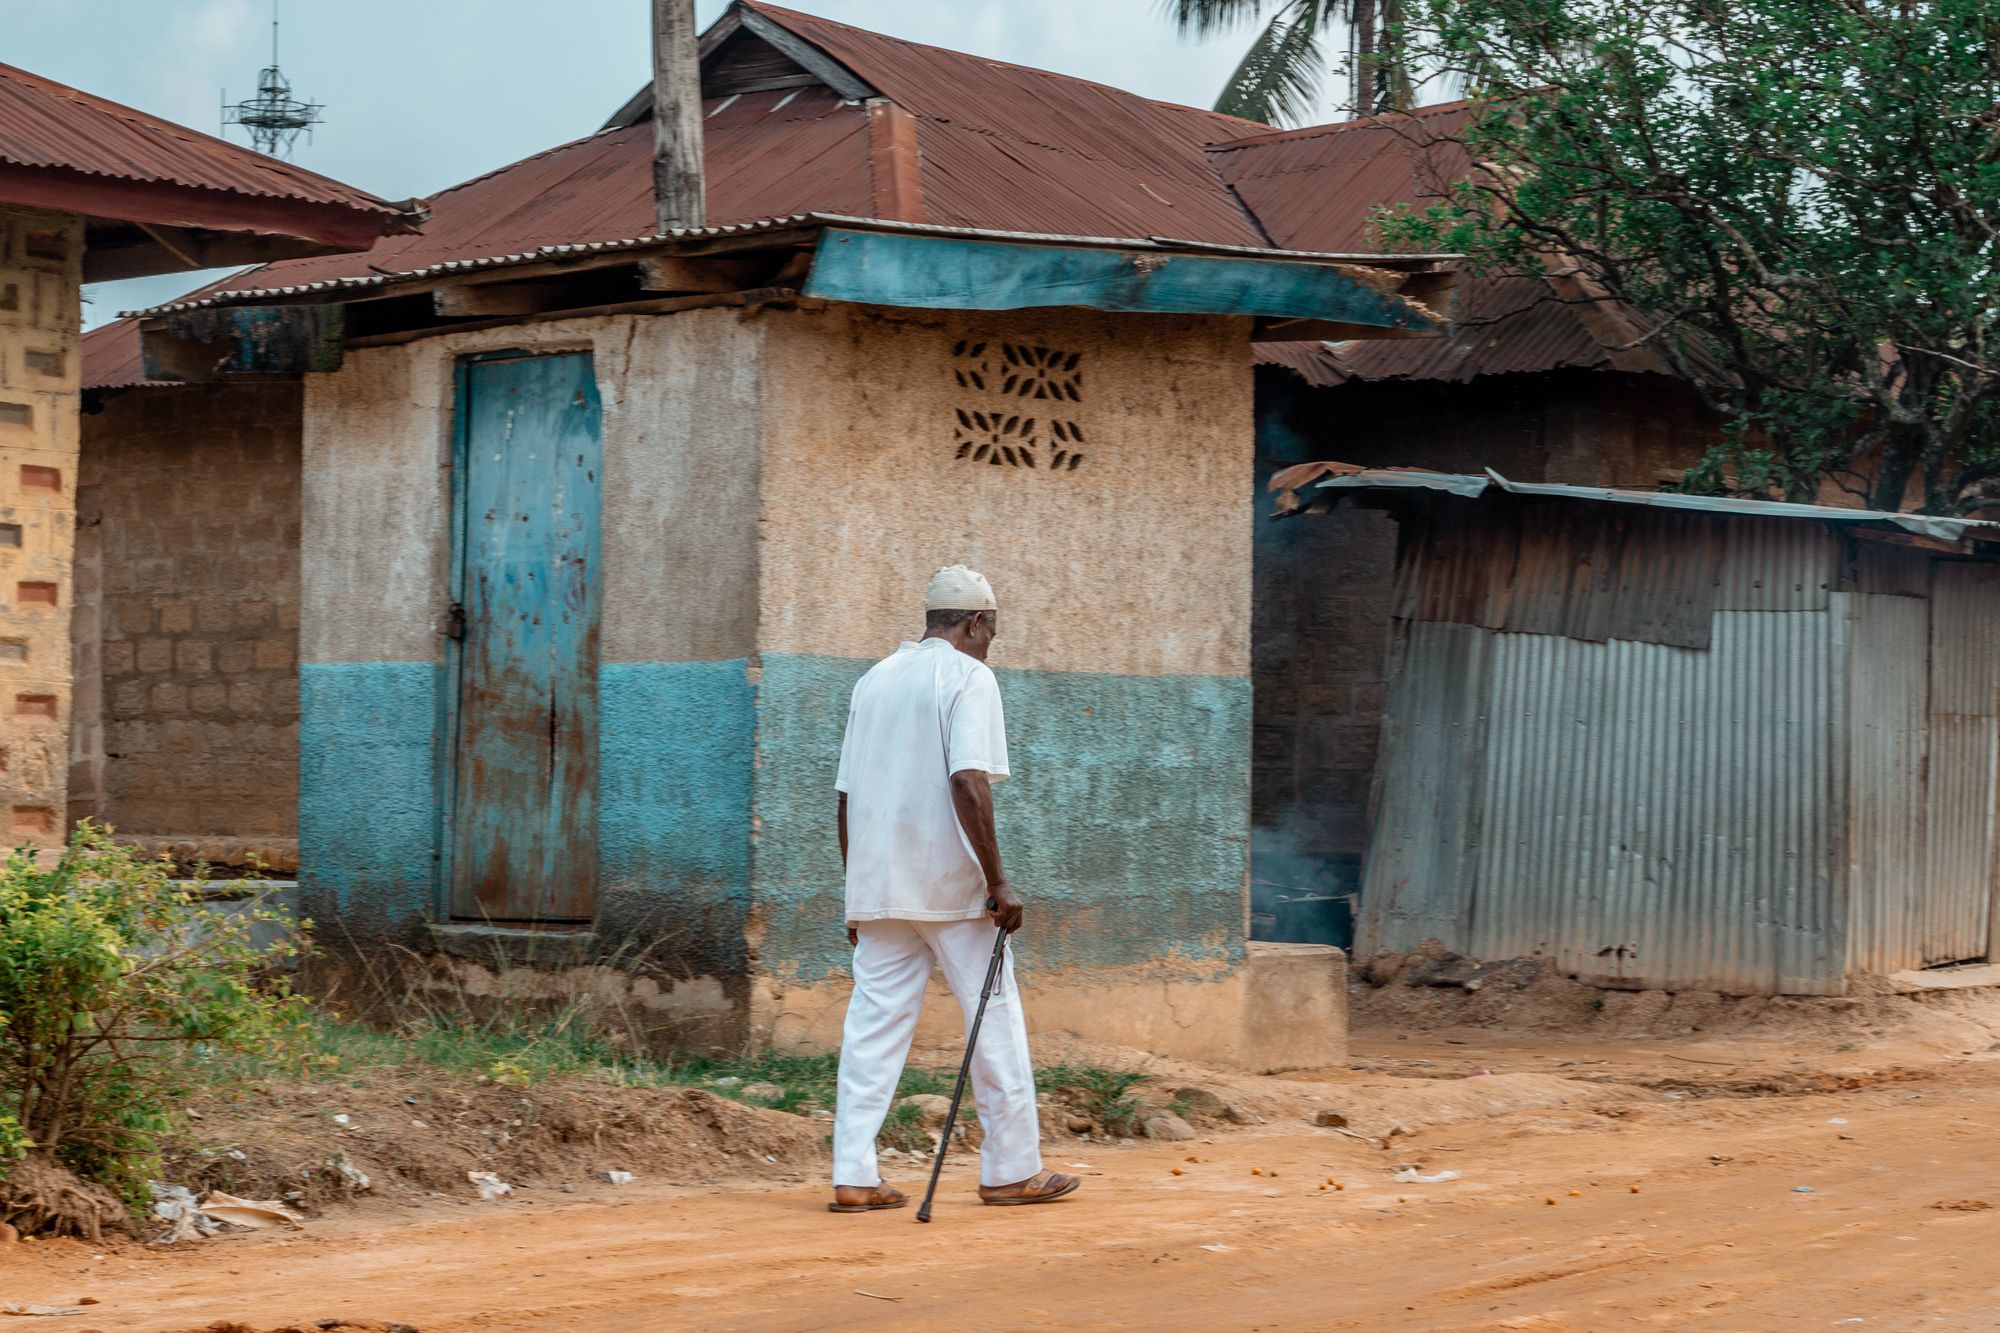 An old man in white pants, shirt and kufi walking in stick in Asaba: A photo by David Elikwu